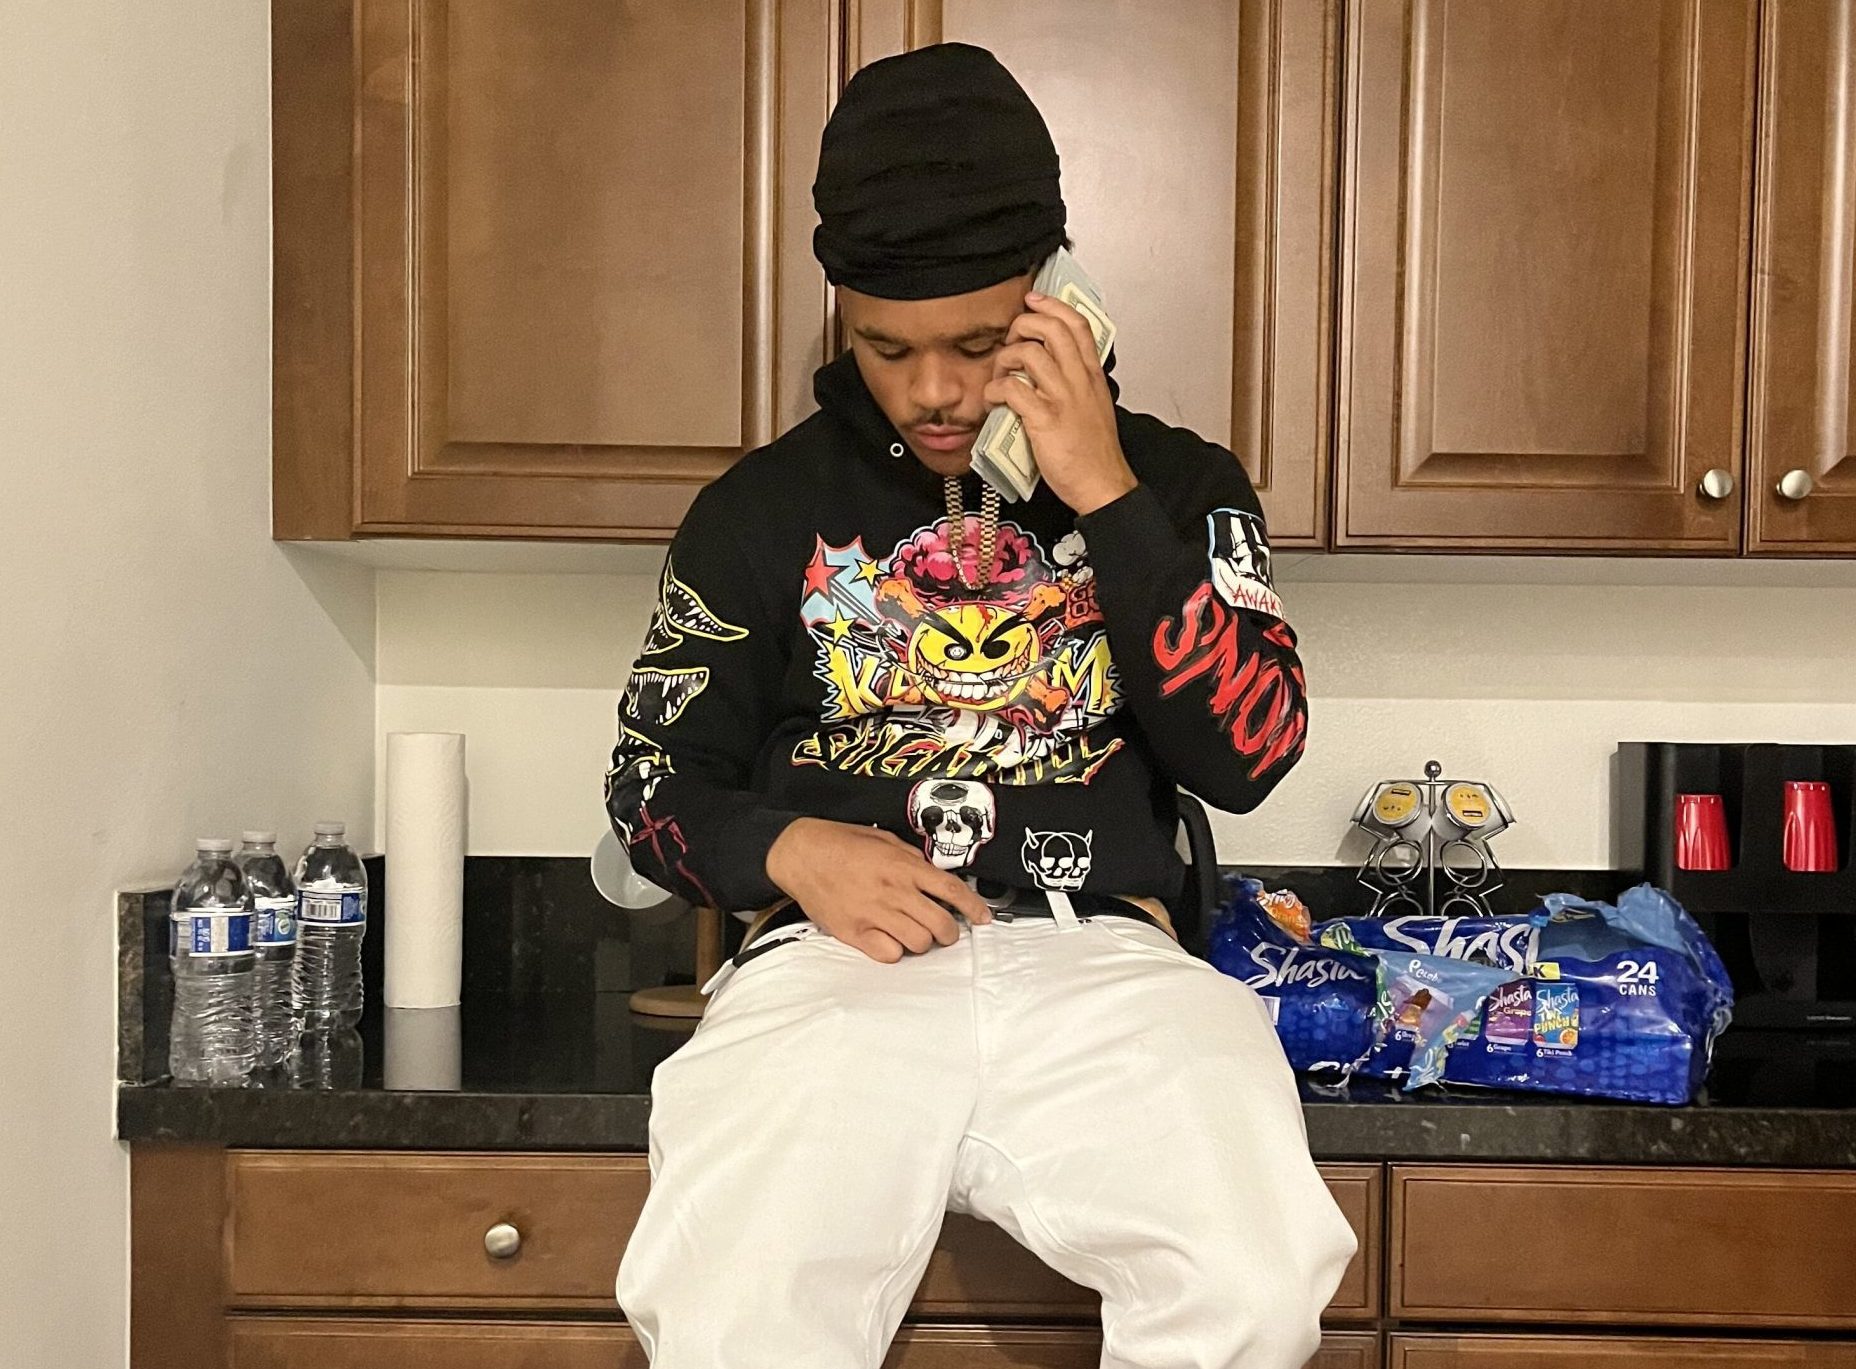 CashDaMac: The Rising Star from Moreno Valley, CA, Taking the Music Industry by Storm